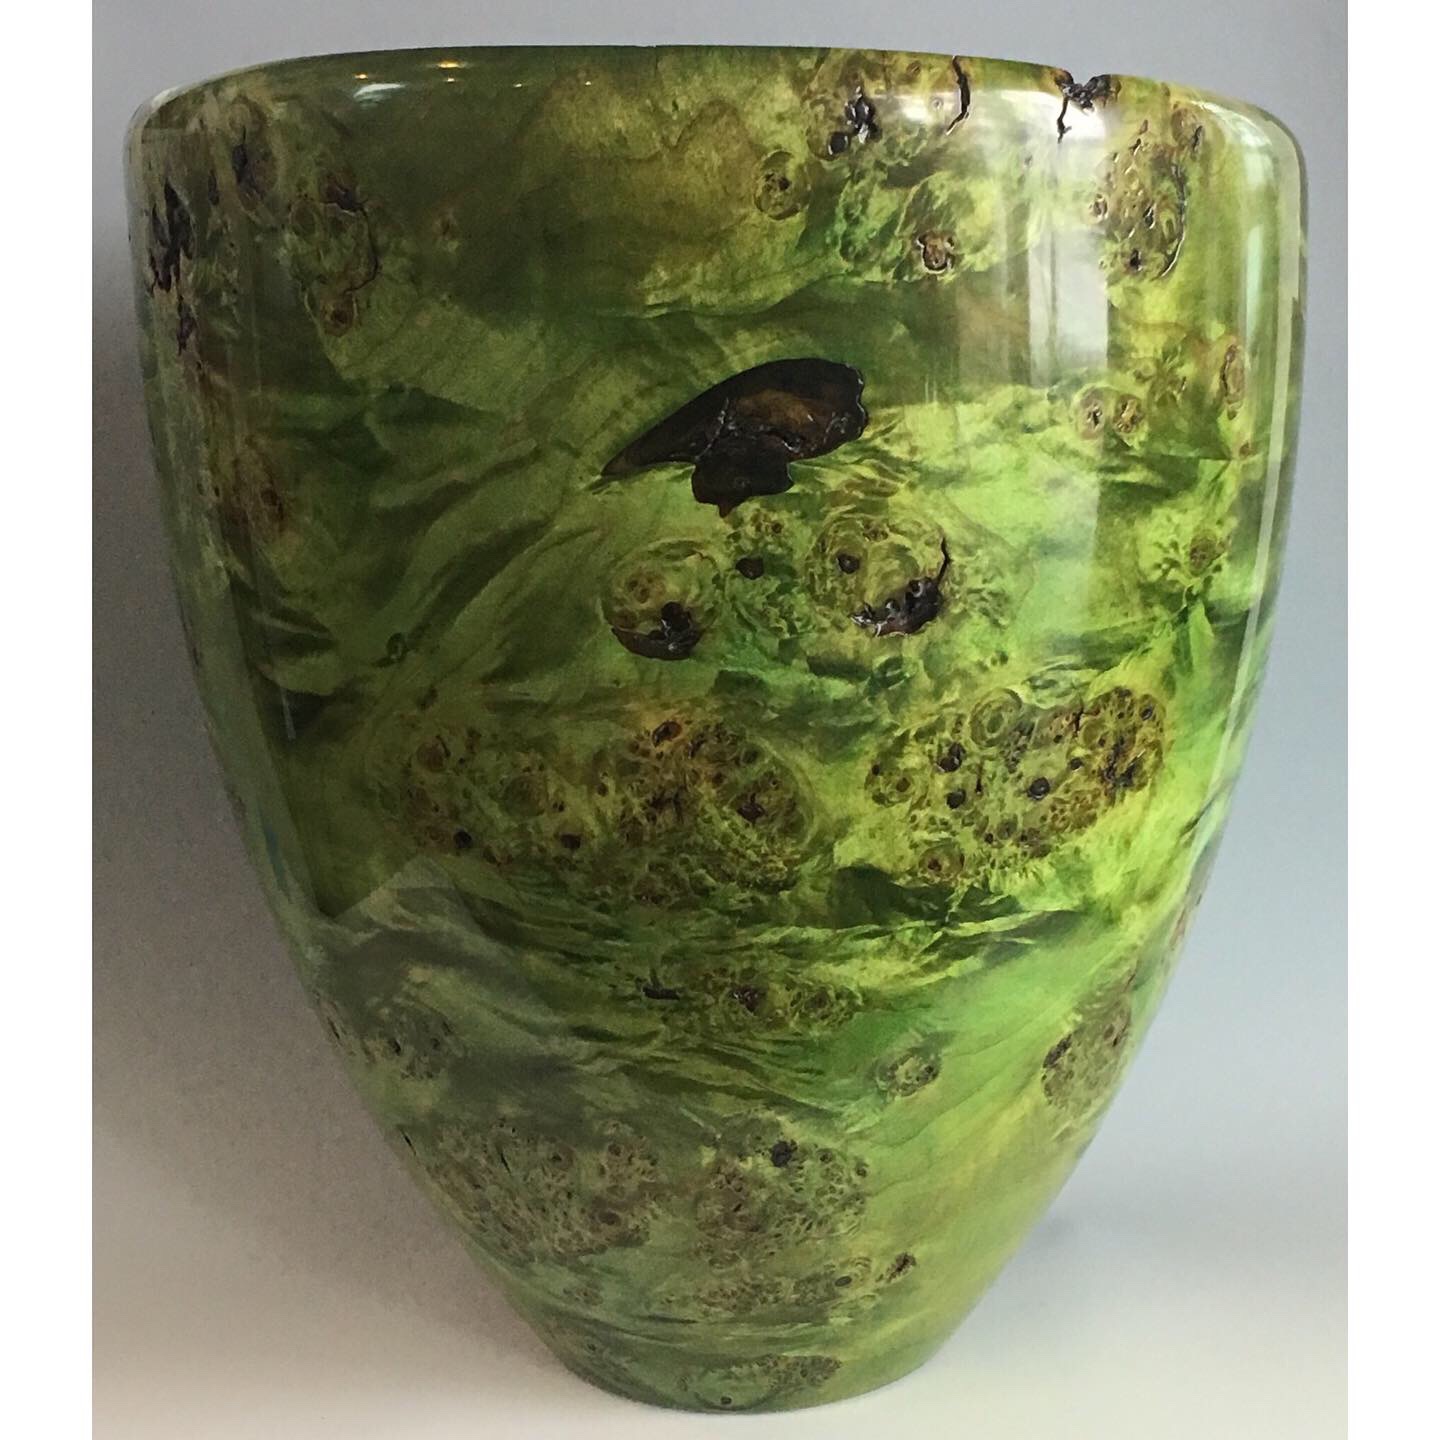 Large Maple Burl vase, dyed green on the outside and cut on a bias so the inside is visible.